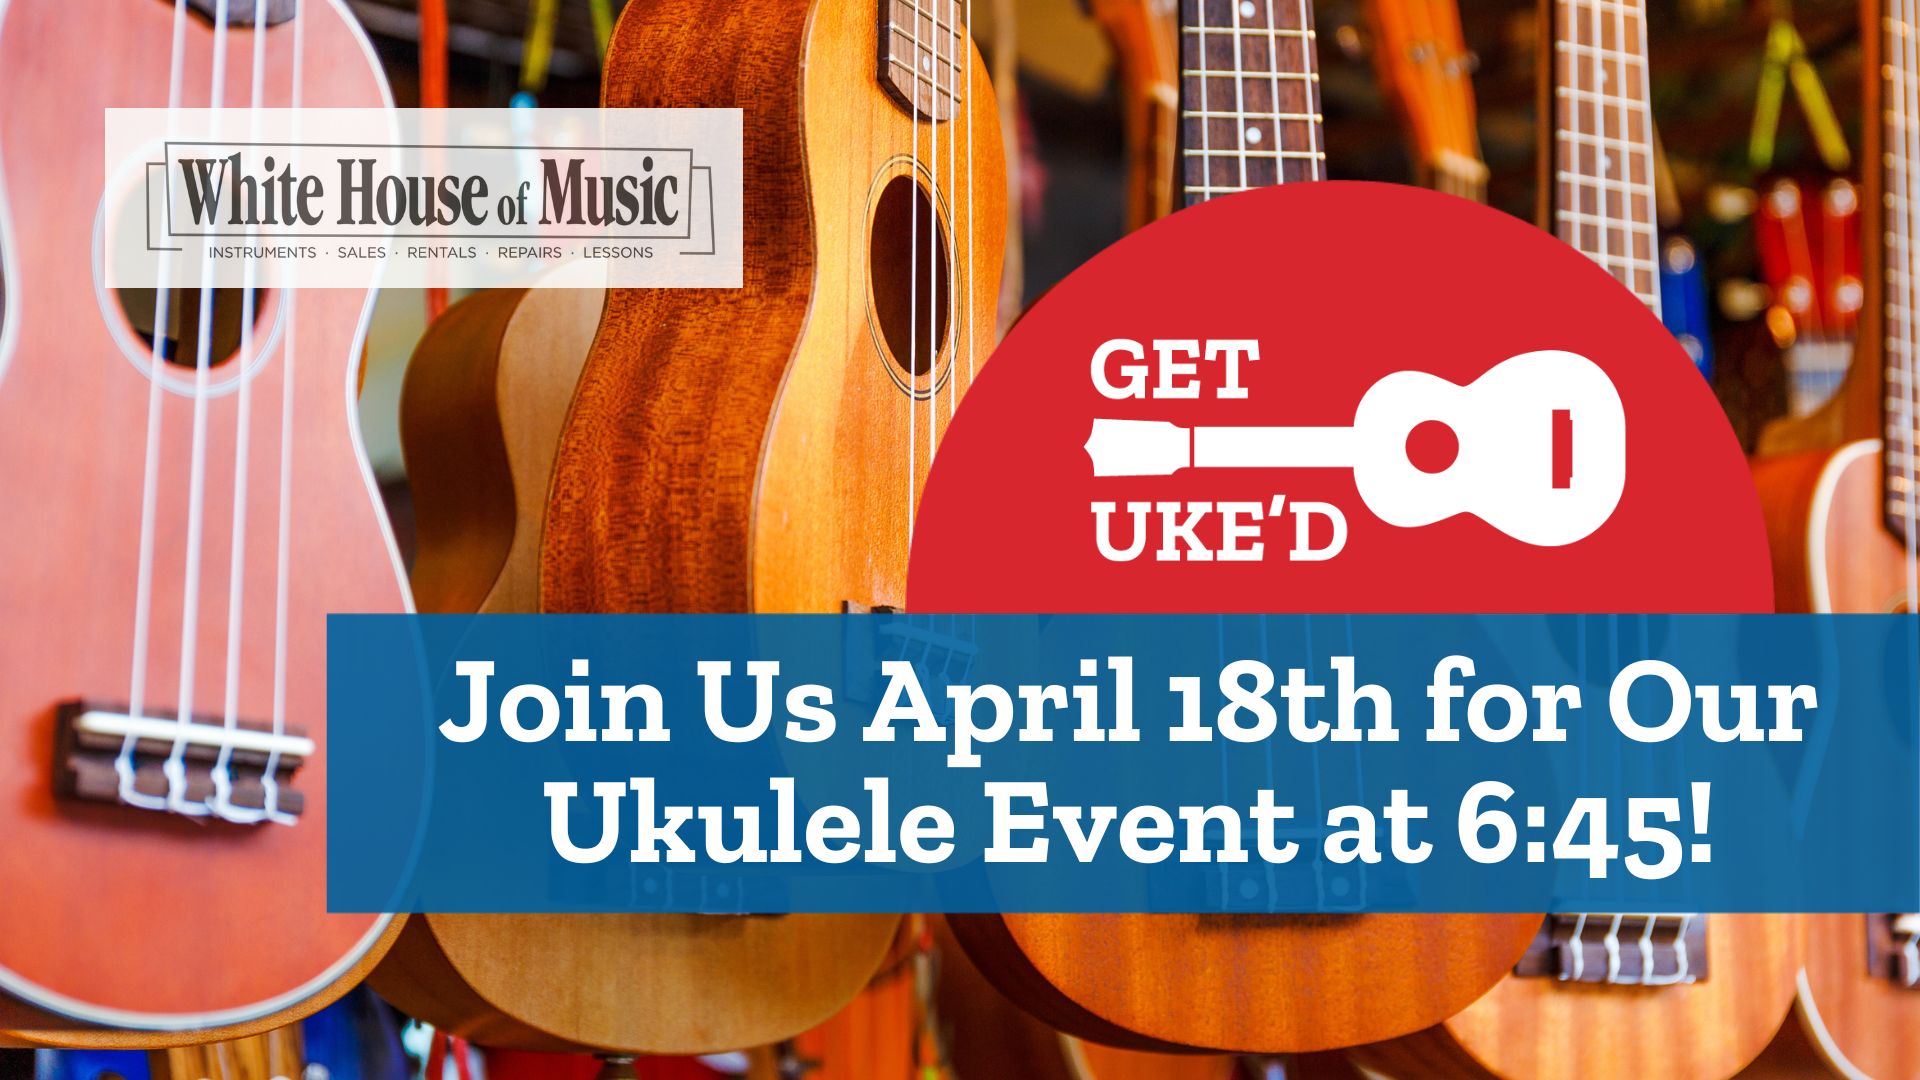 Join Us for our monthly get uke'd event April 18th